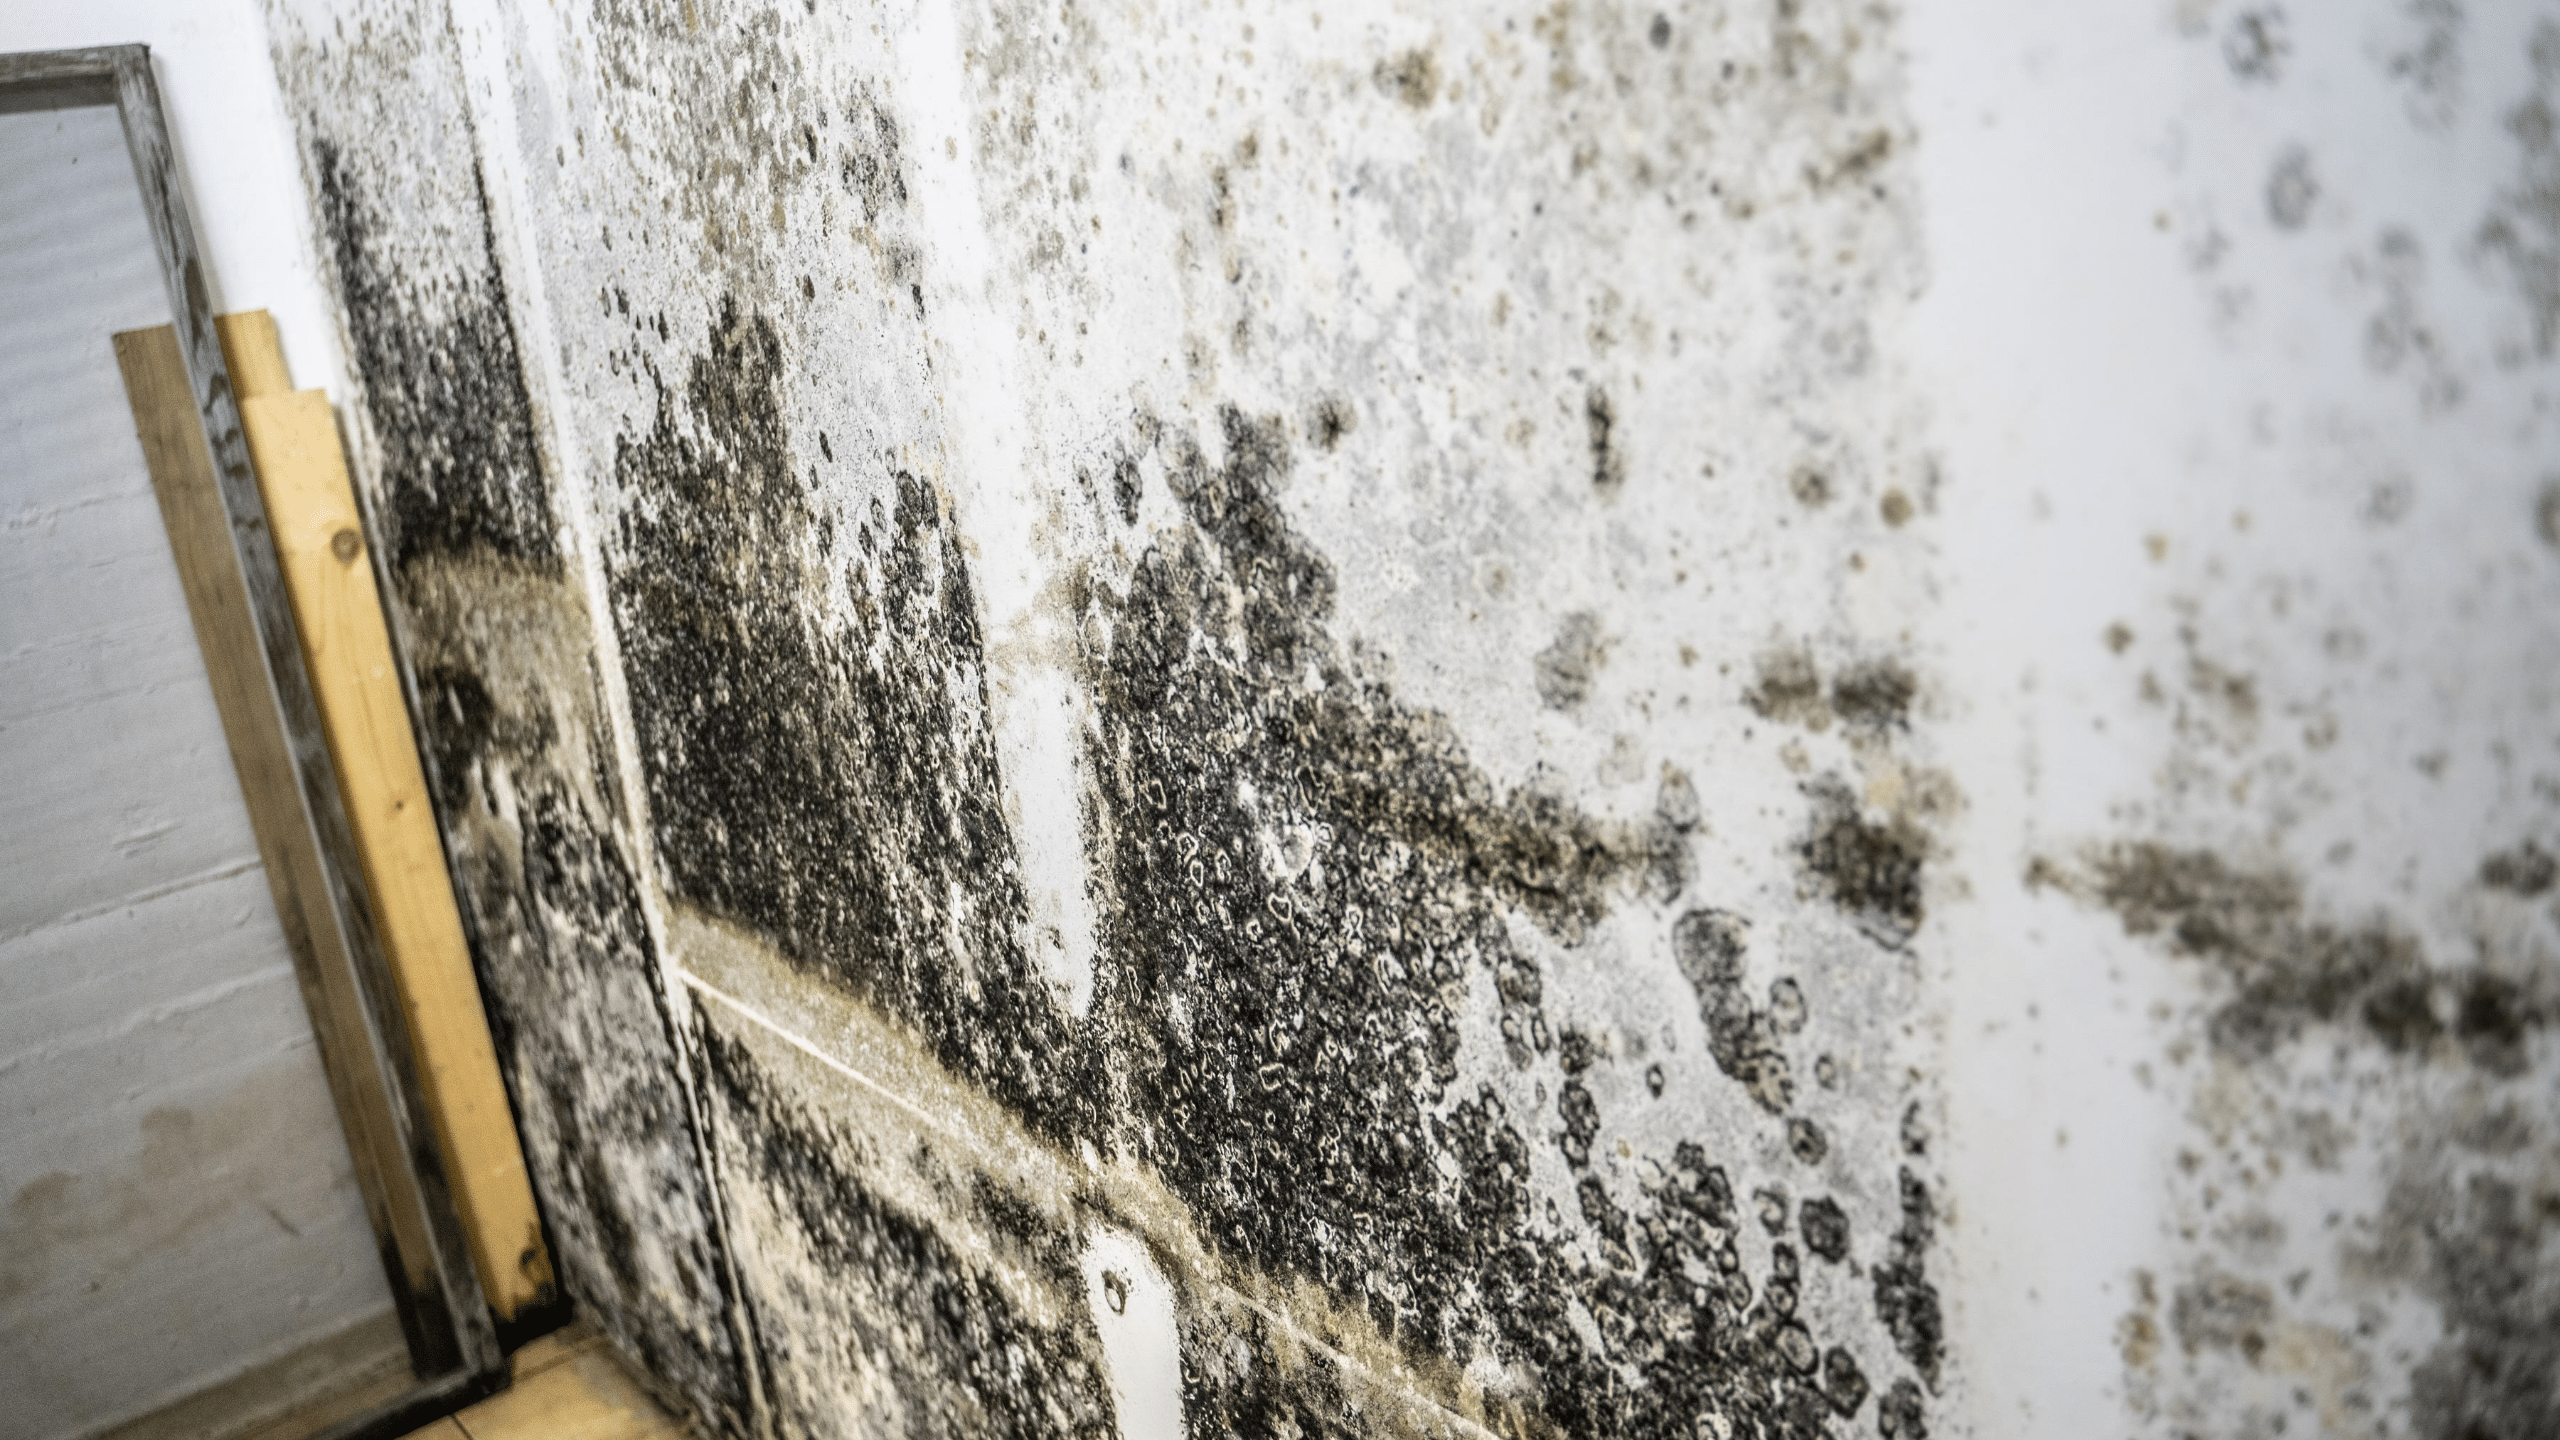 Consumer’s Guide to Indoor Mold